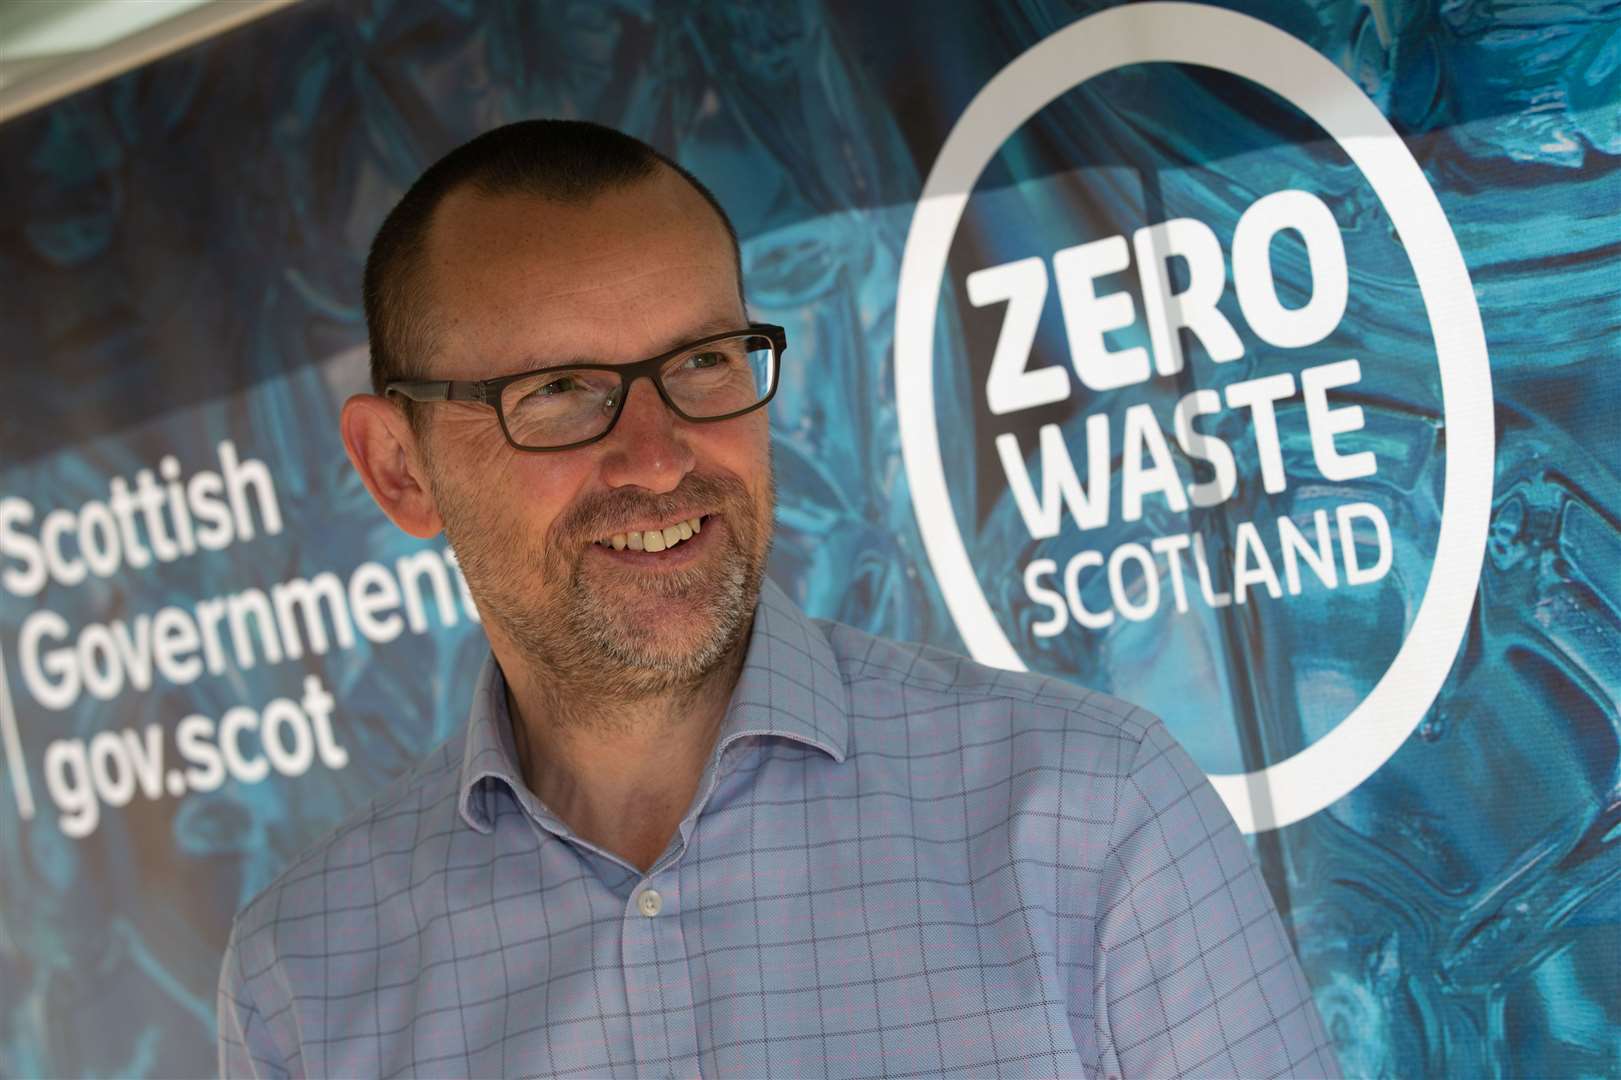 Zero Waste Scotland chief executive Iain Gulland has praised those taking part in the scheme to tackle single-use items waste.